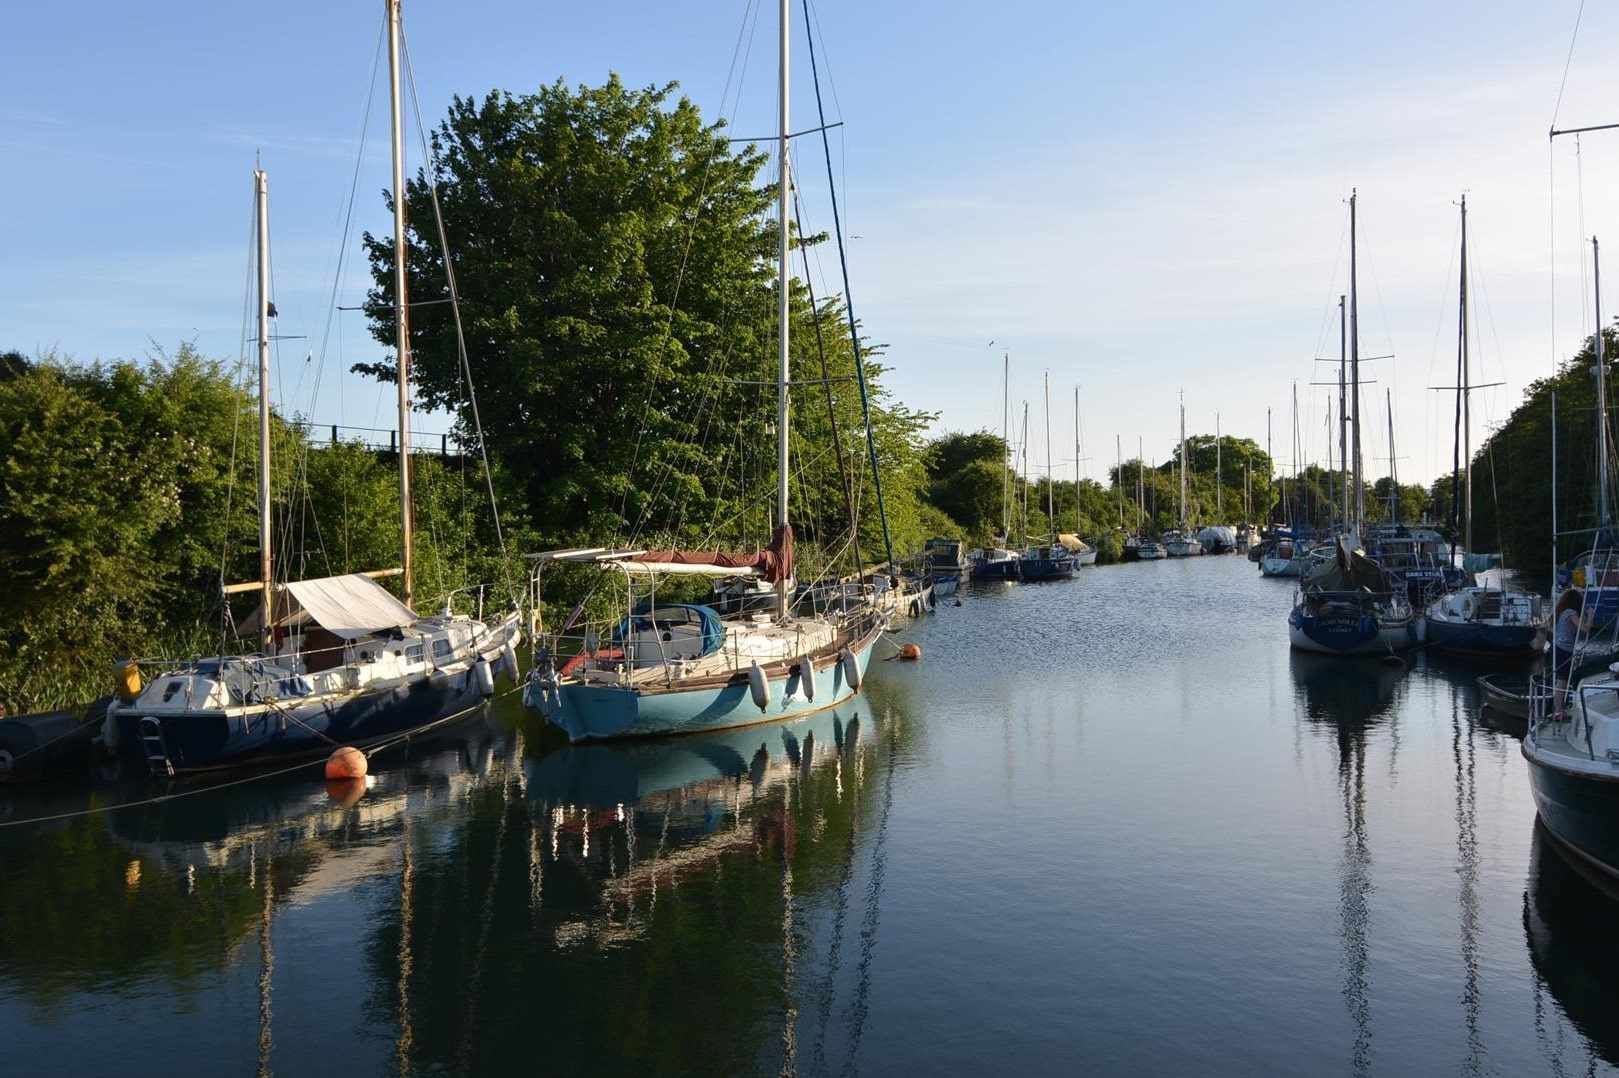 boats-docked-at-lydney-harbour-on-sunny-day-things-to-do-in-the-forest-of-dean